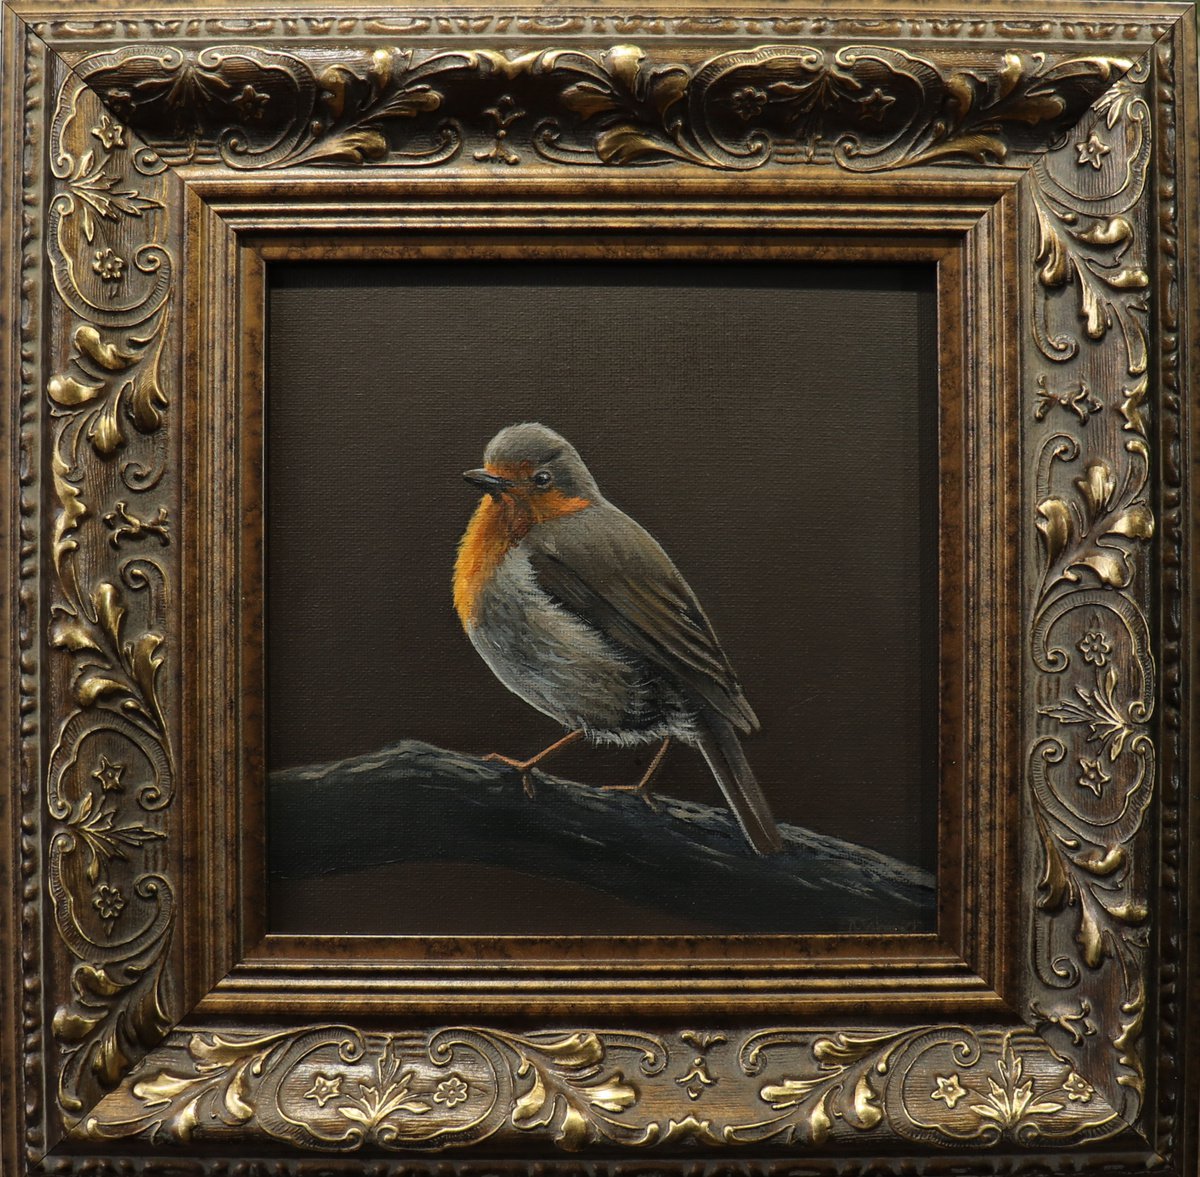 Morning Chorus Series - Red Robin, Bird Artwork, Animal Art Framed by Alex Jabore Paintings and Prints